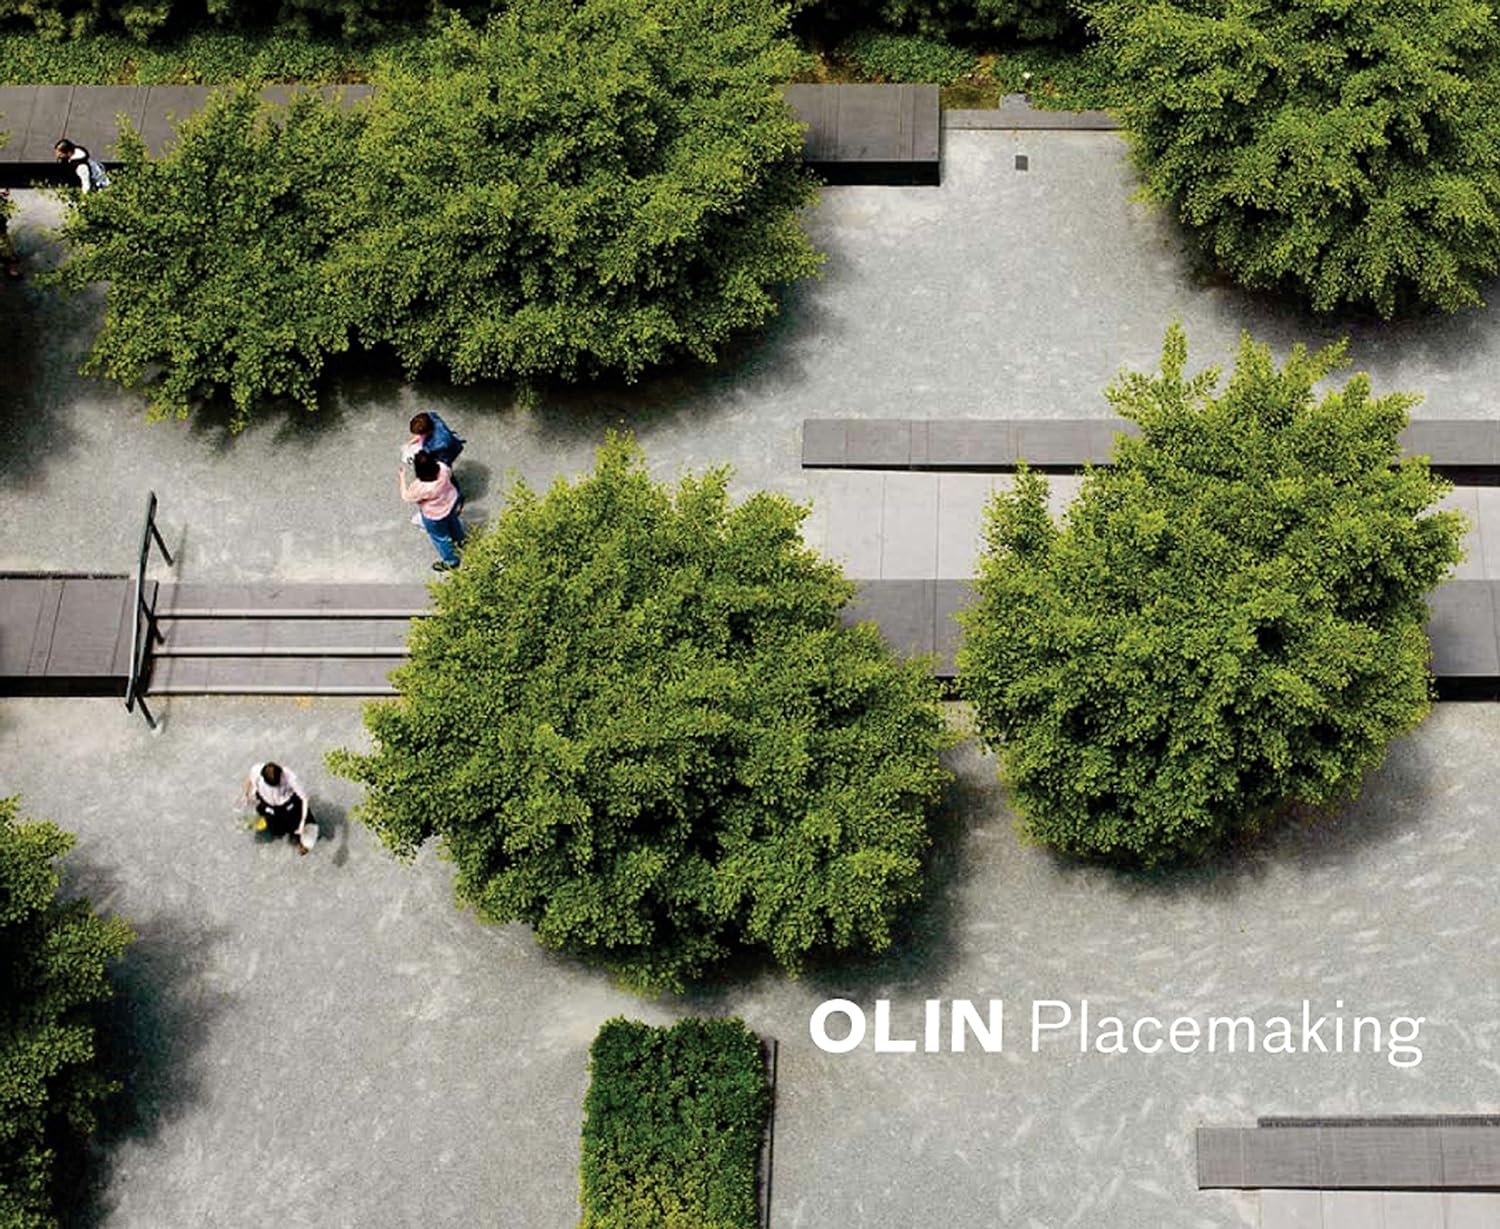  - Olin. Placemaking